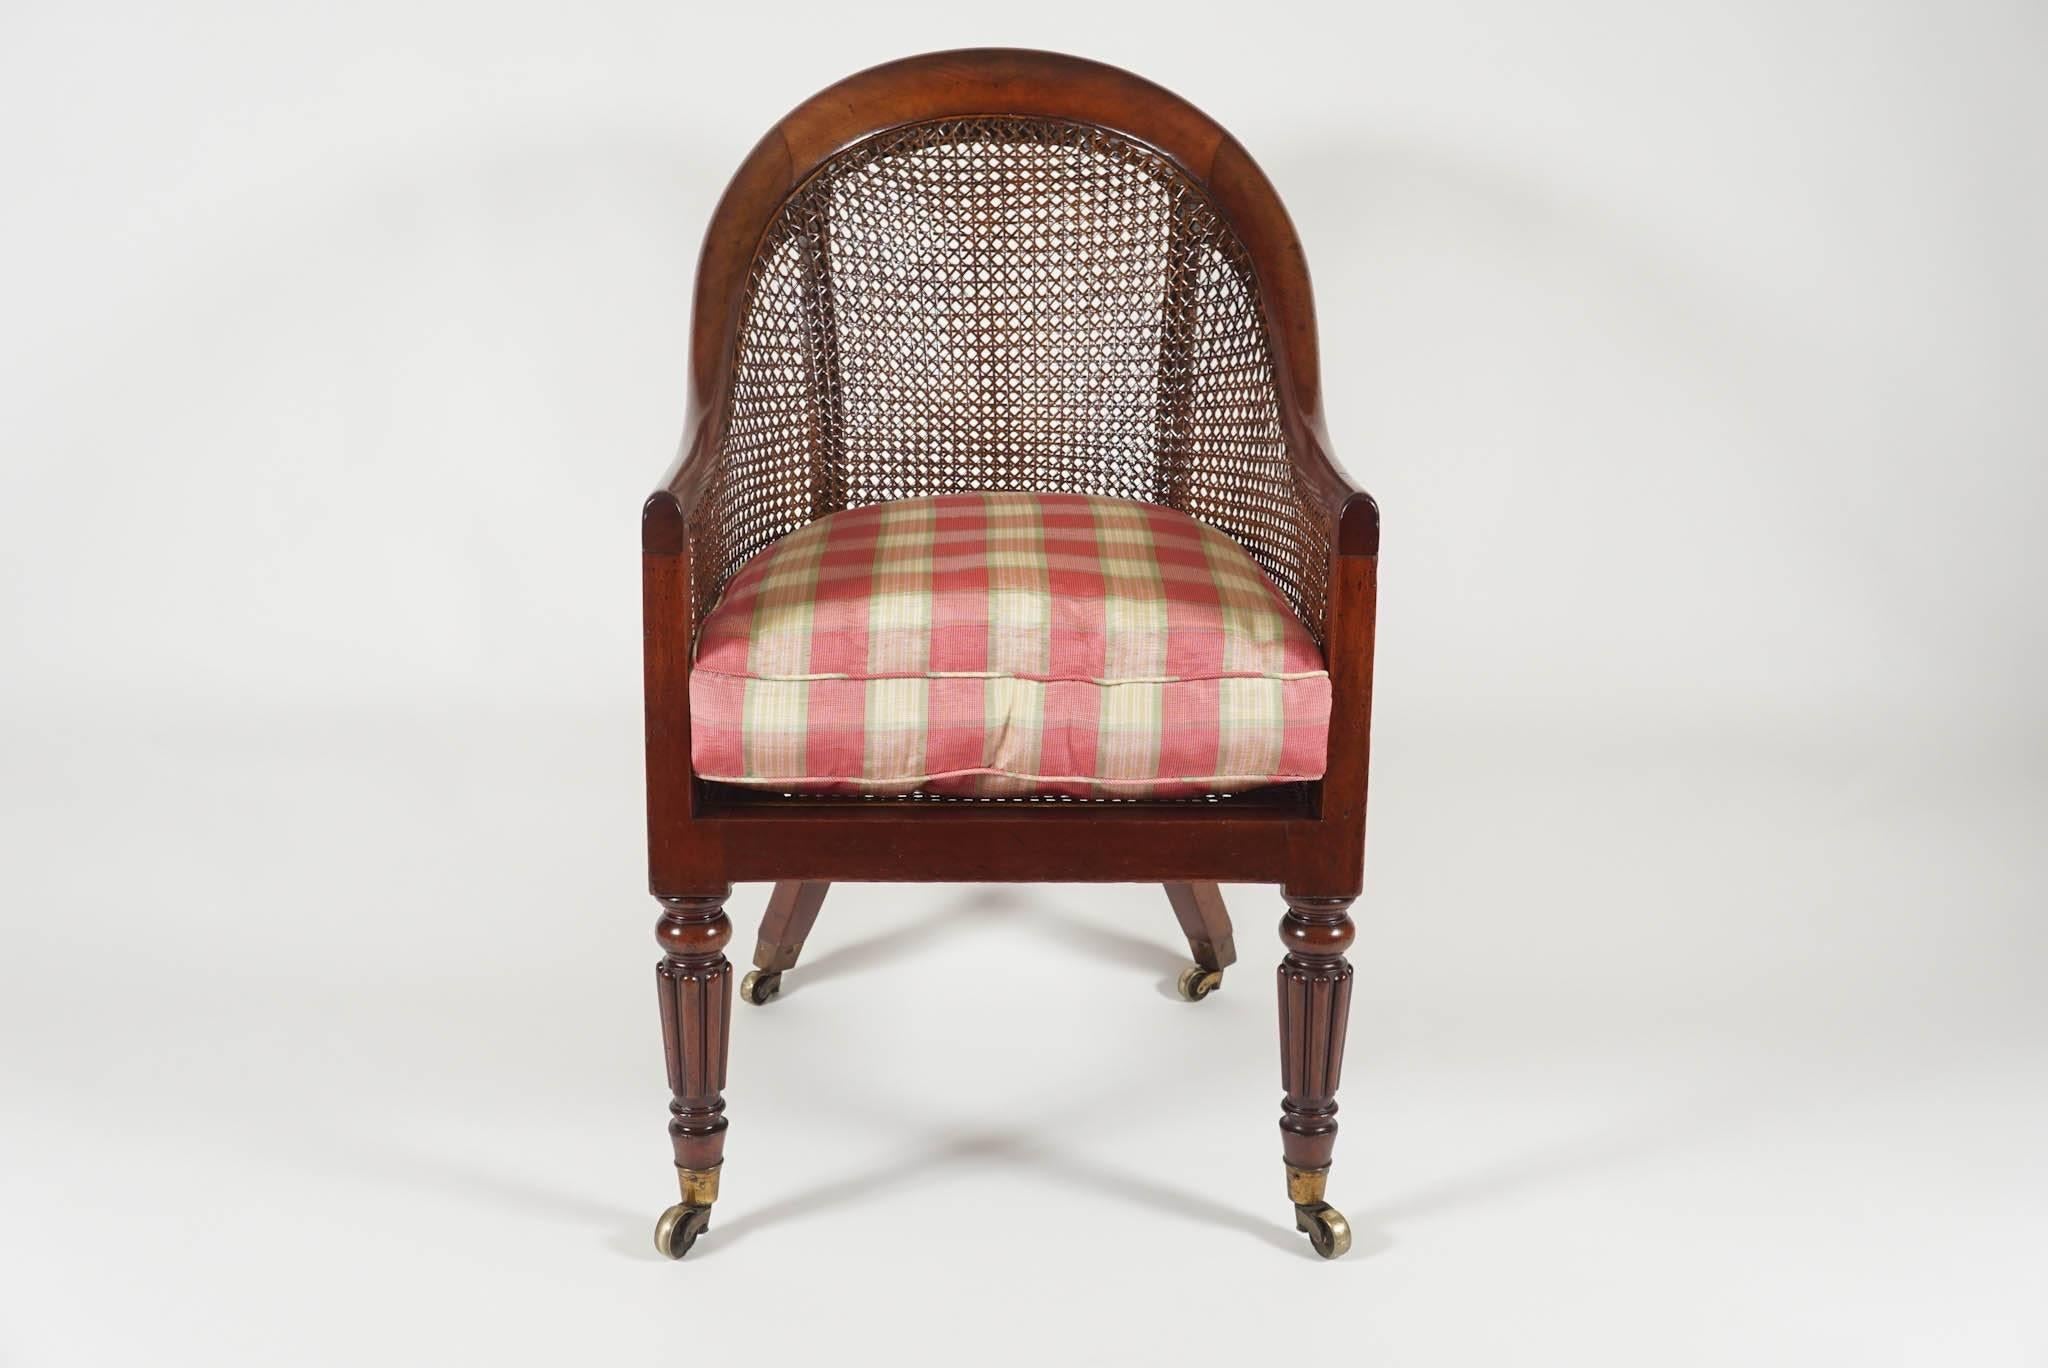 An elegant English Regency period, circa 1820, armchair, library chair, or bergere of solid mahogany construction having rounded crest rail with caned back, sides, and seat with loose squab cushion on turned and reeded front legs and splayed rear,